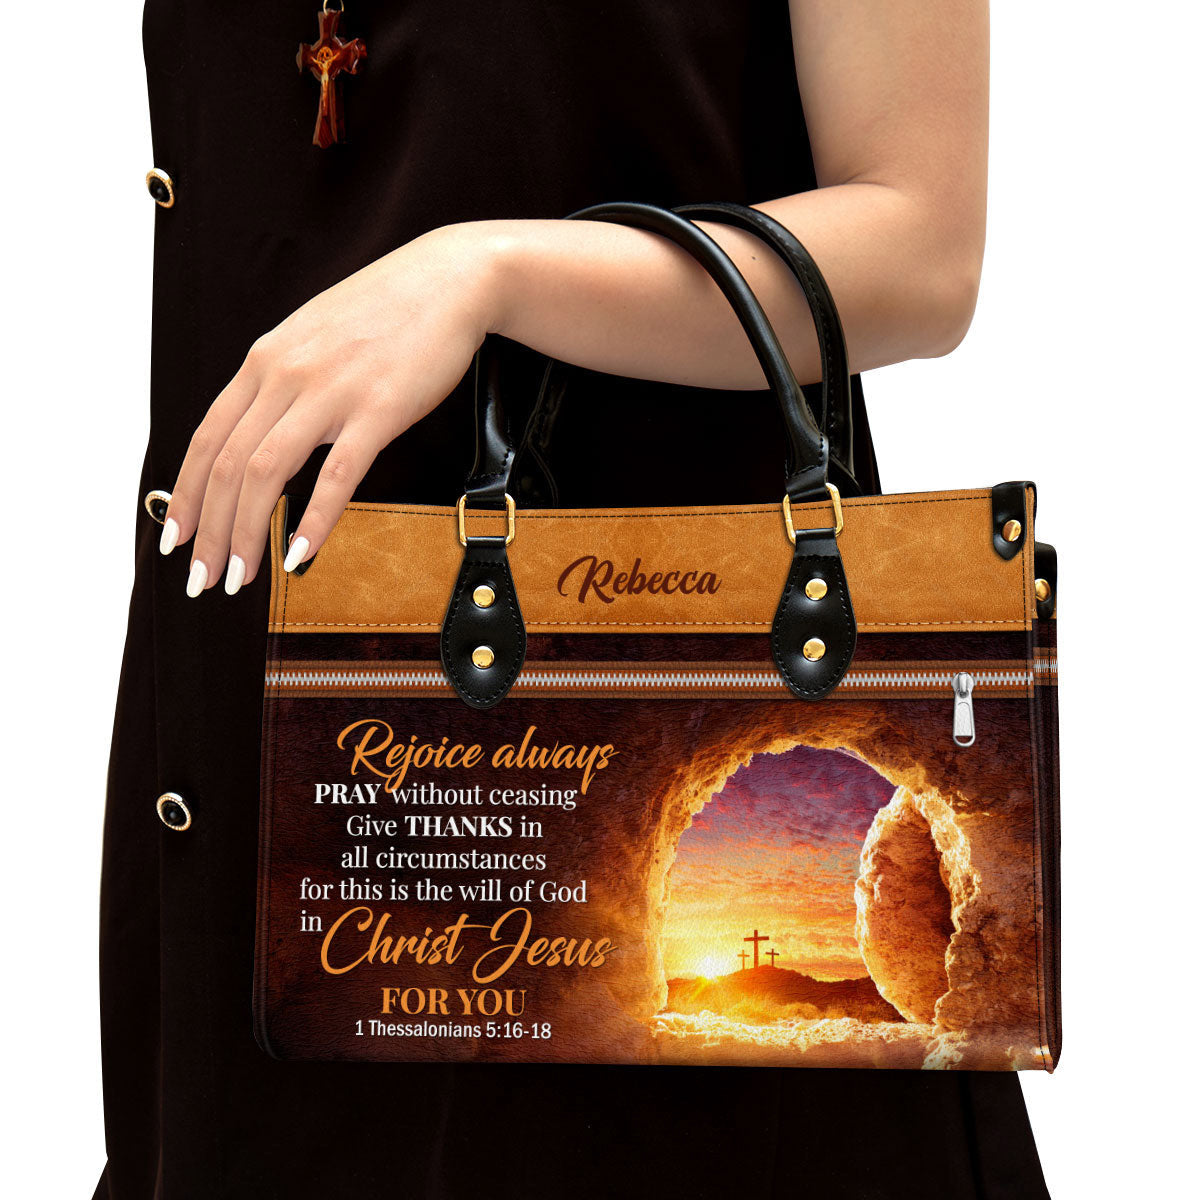 Rejoice Always Pray Without Ceasing Personalized Leather Bag - Women Pu Leather Bag - Christian Gifts For Women